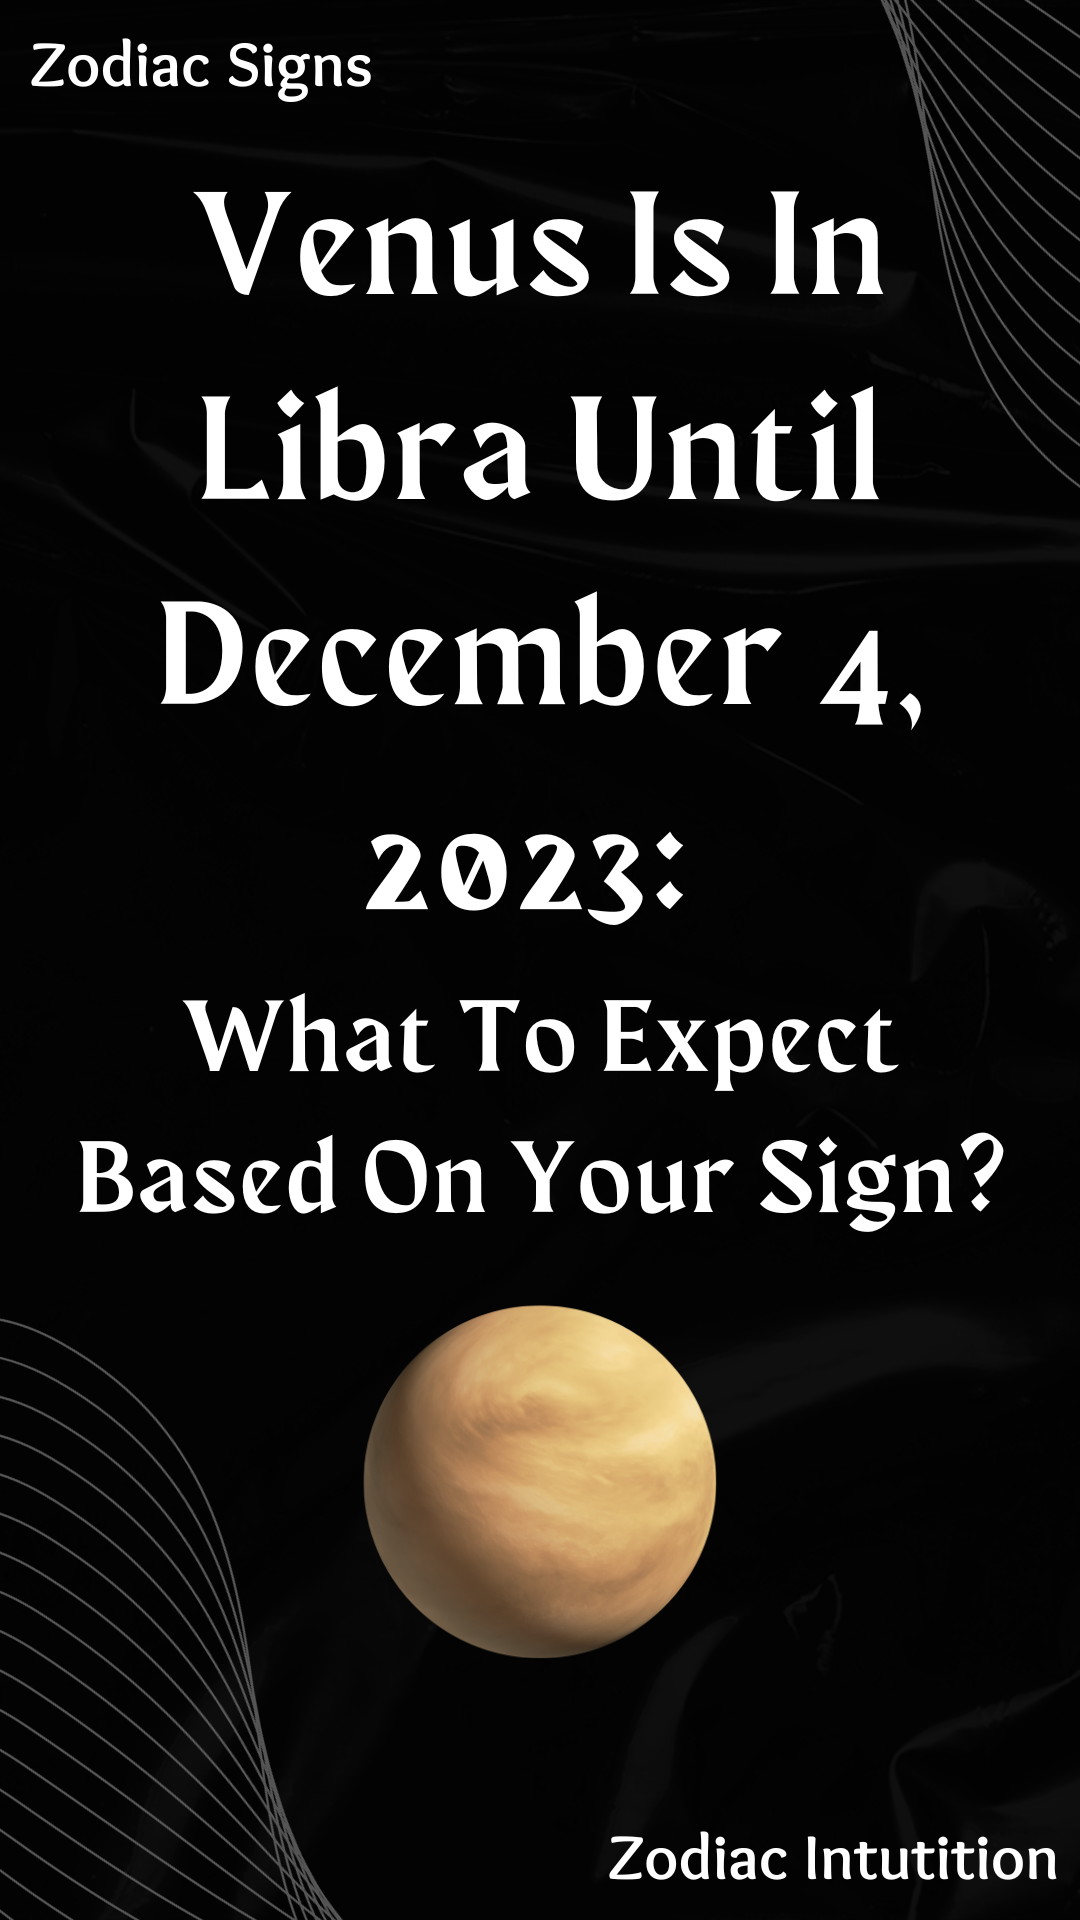 Venus Is In Libra Until December 4, 2023: What To Expect Based On Your Sign?